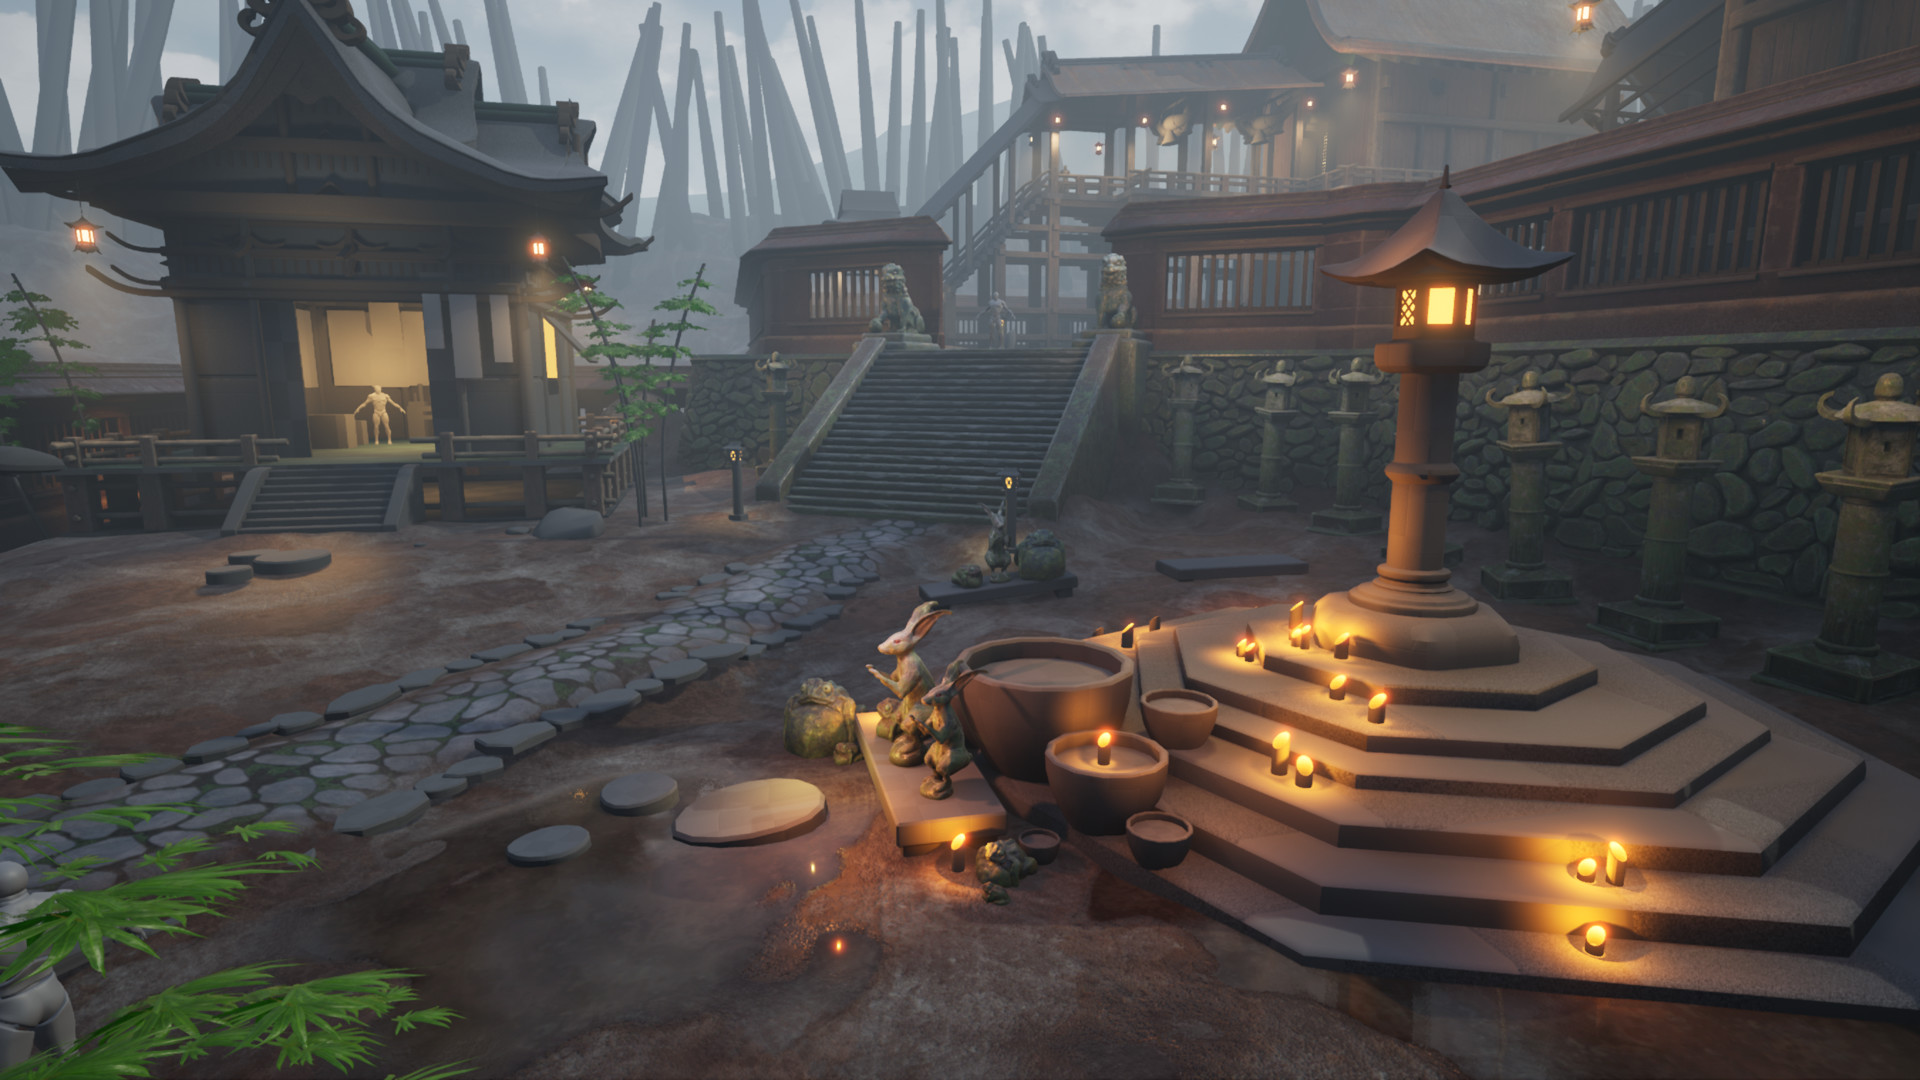 Unreal 4 screenshot of the what is now main camera angle. In the middle are few stone basins for water. Next to them are little animal statues: frogs and rabbits. Behind those are the steps with the stone lantern. Everything now has much more color and behind those elements are mossy stone surfaces.